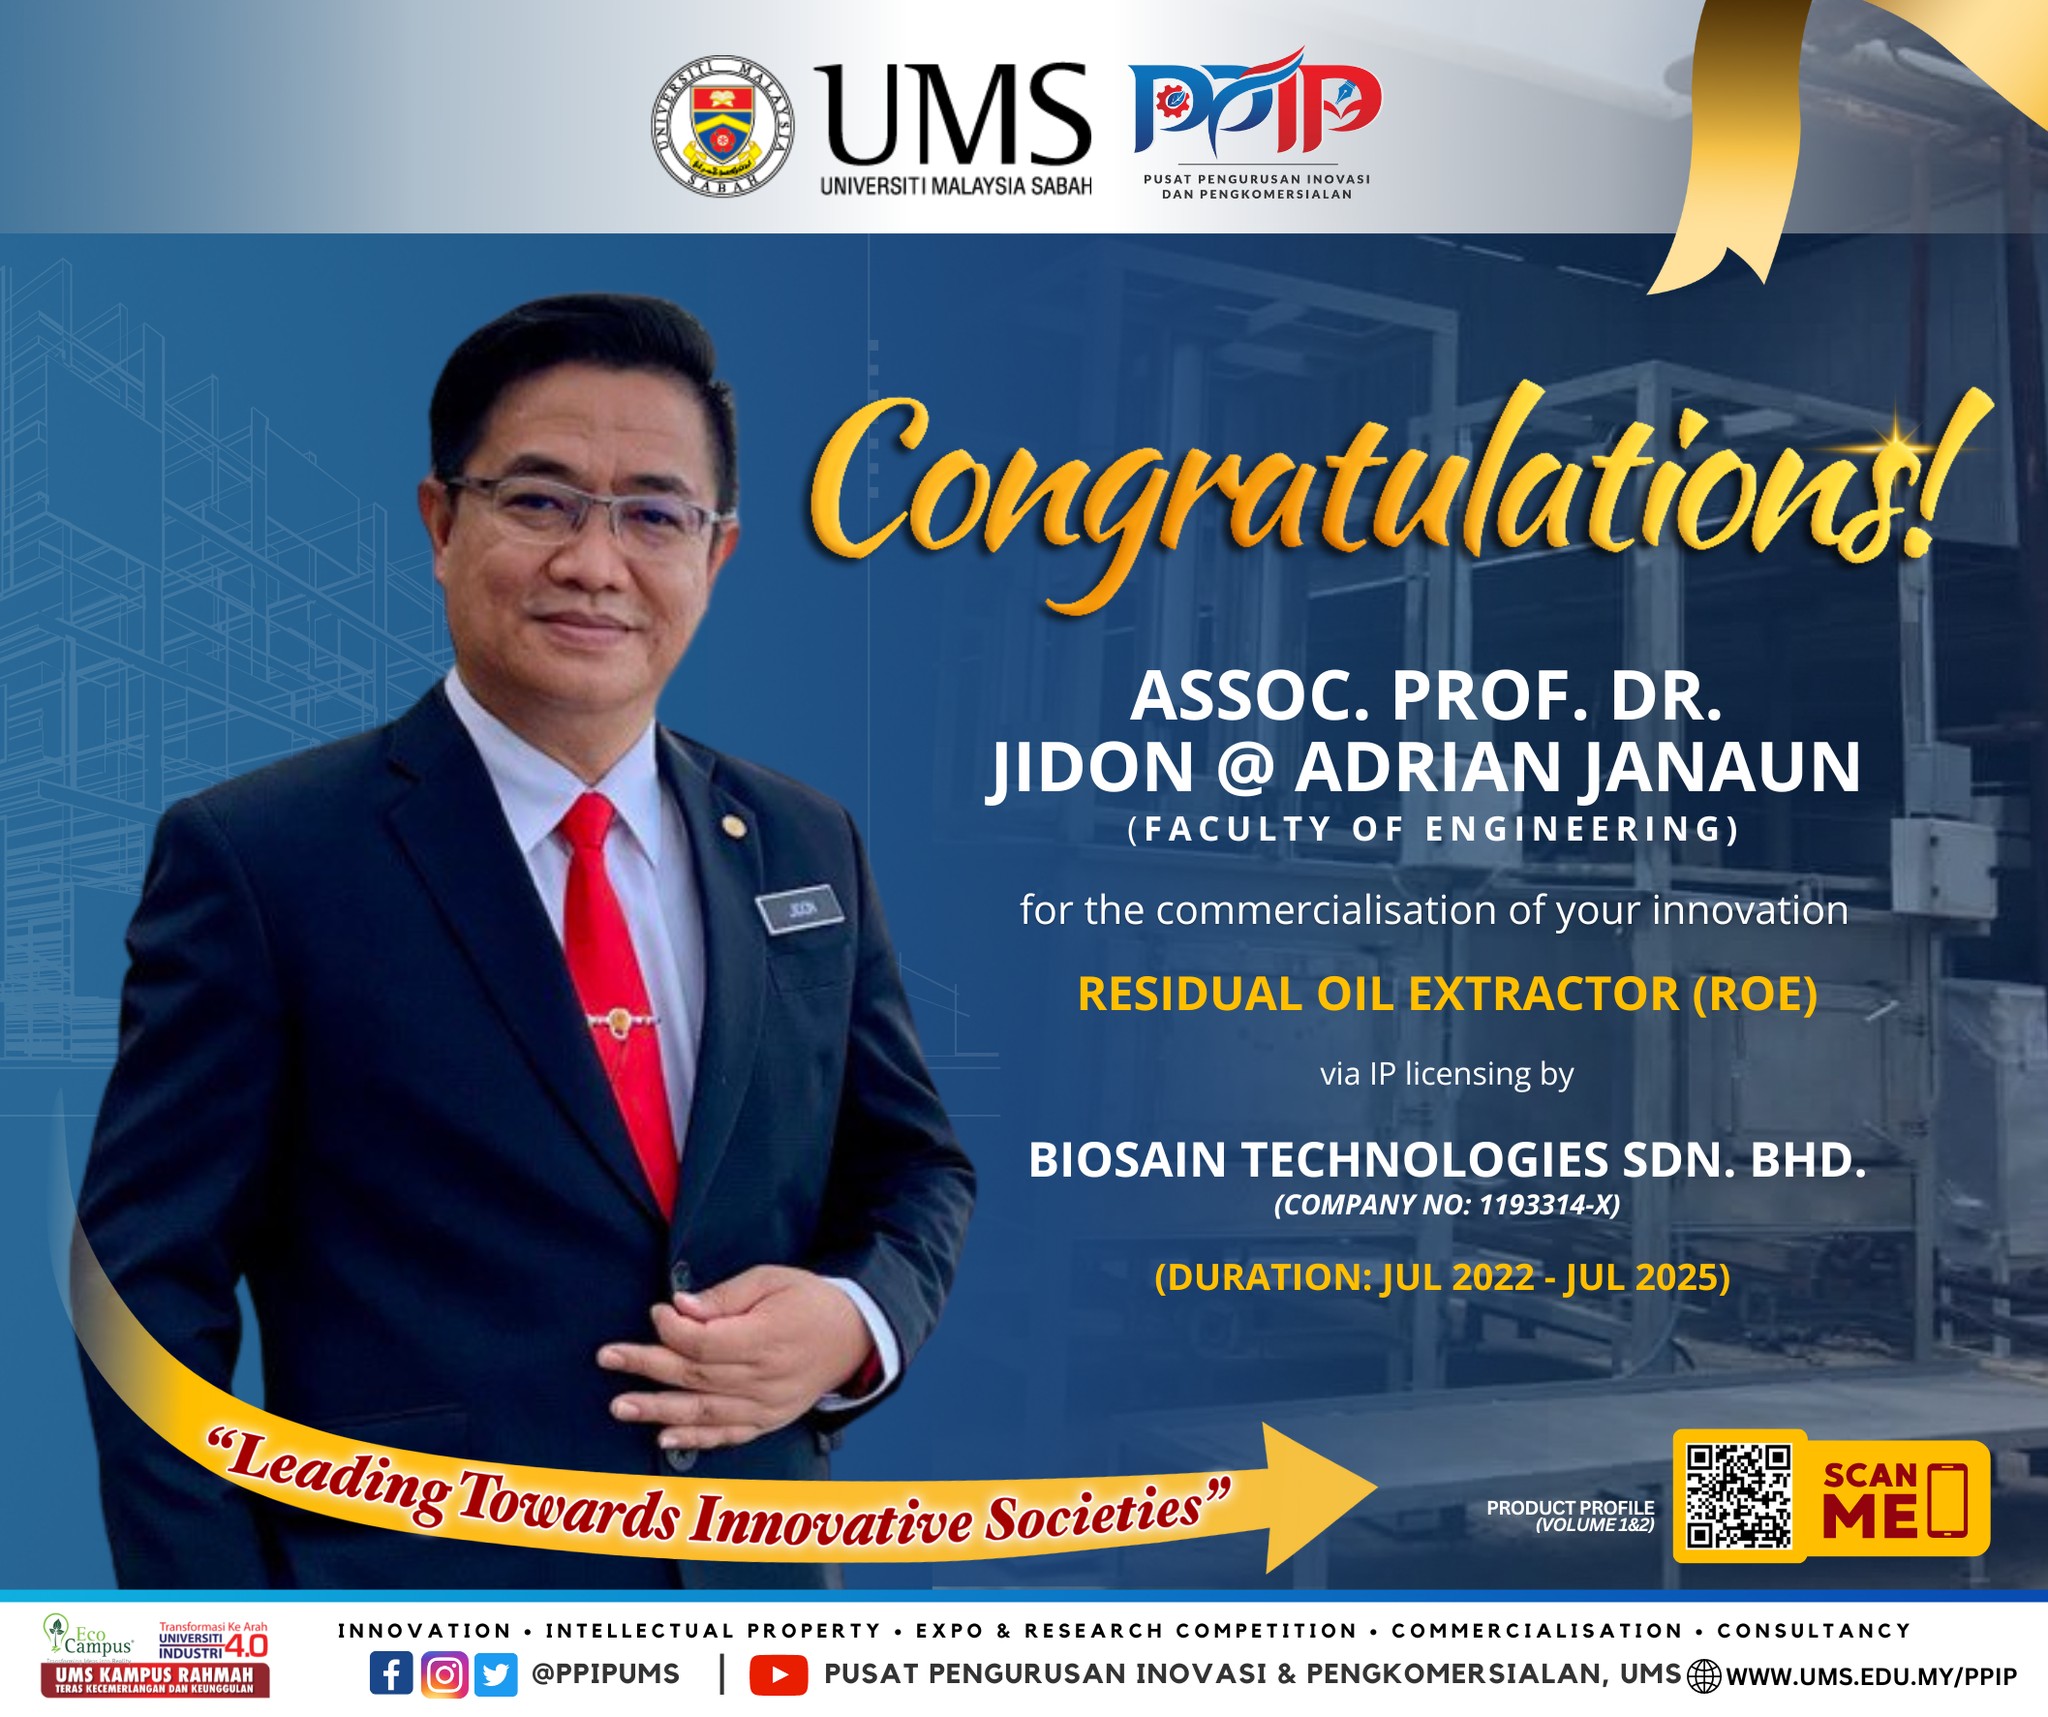 Congratulations to Assoc. Prof. Dr. Jidon @ Adrian Janaun, for the commercialisation of your innovation!